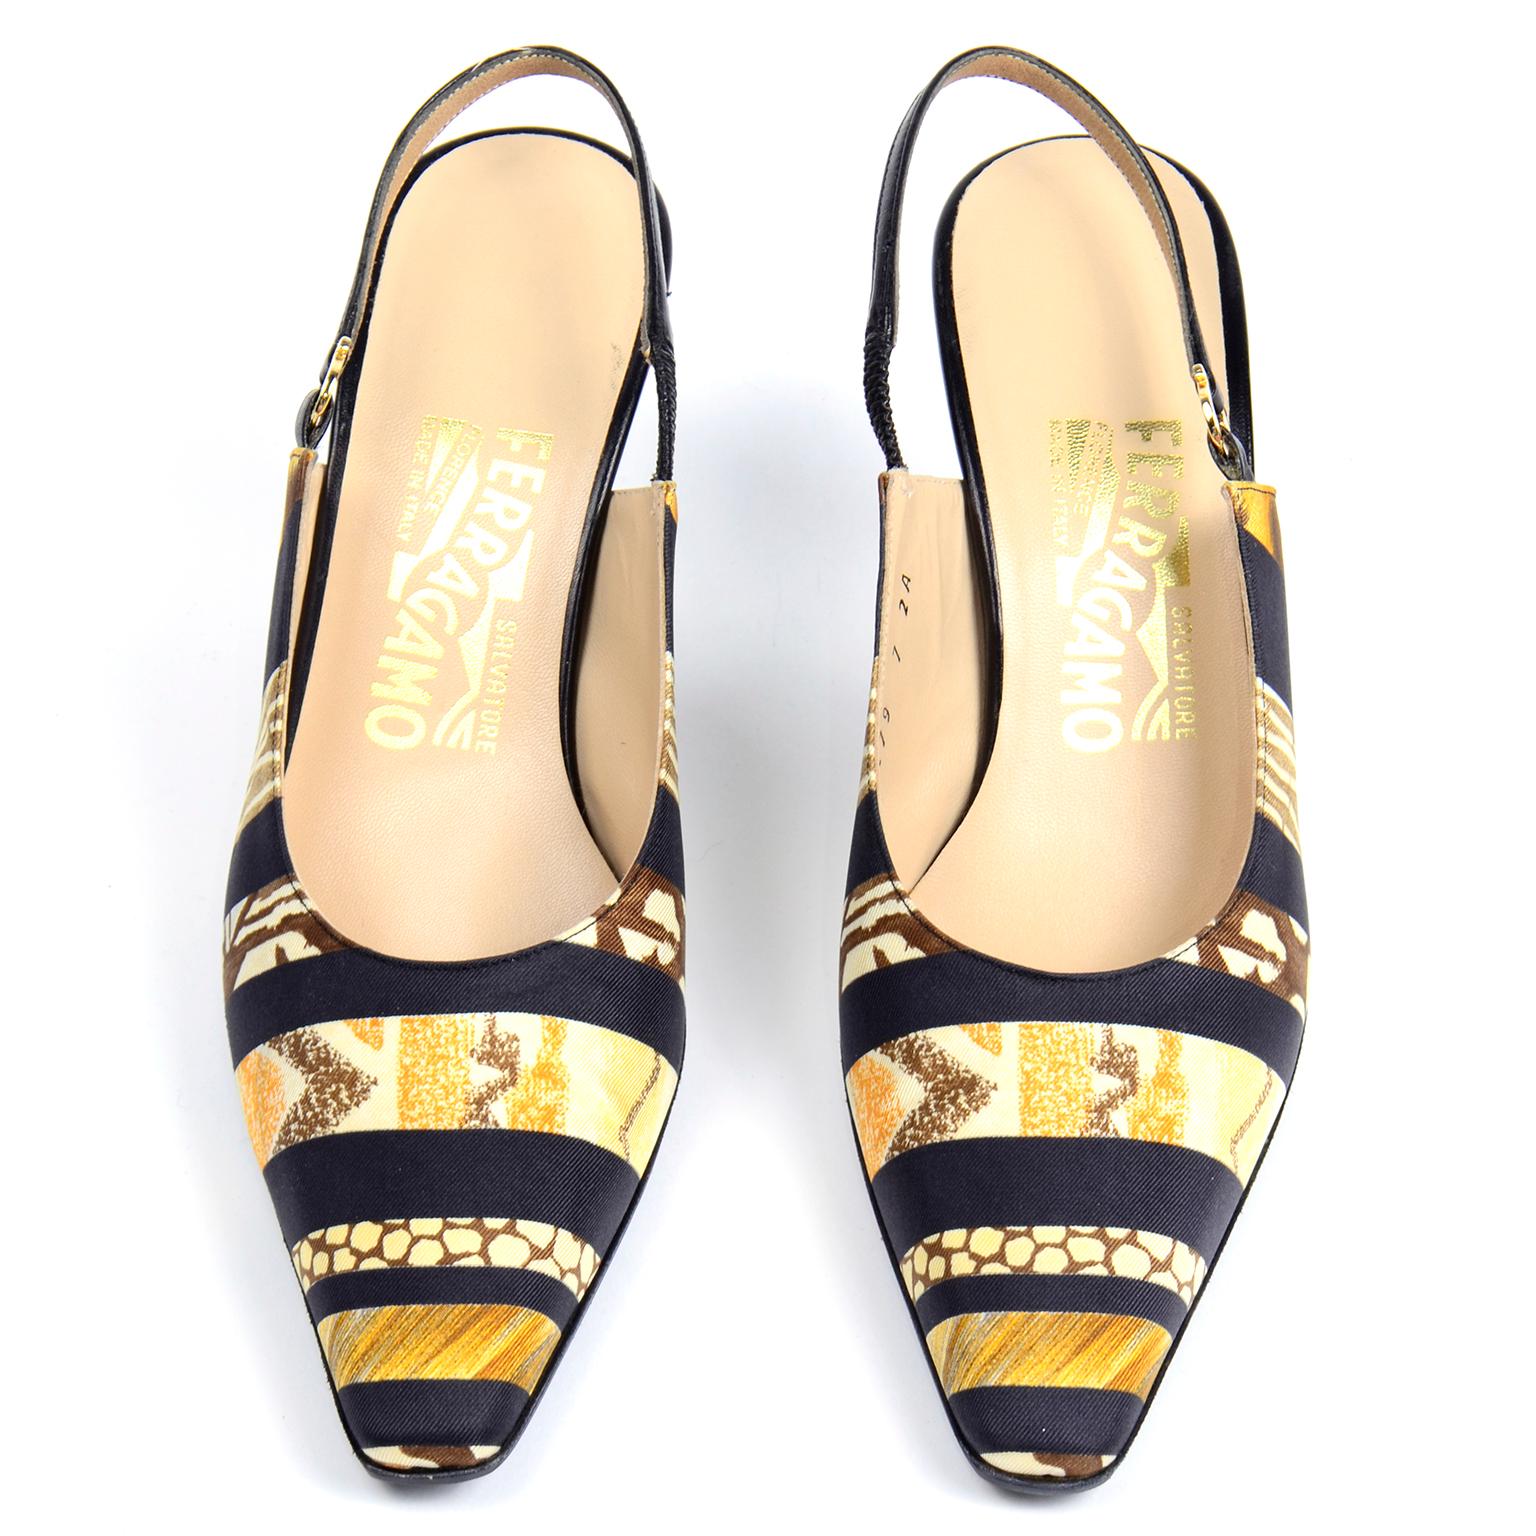 These lovely scarf print Salvatore Ferragamo silk and leather slingback heels have a slightly squared pointed toe. We actually had the matching scarf to these shoes but sold it a couple of years ago. The uppers are in a silk scarf print with a